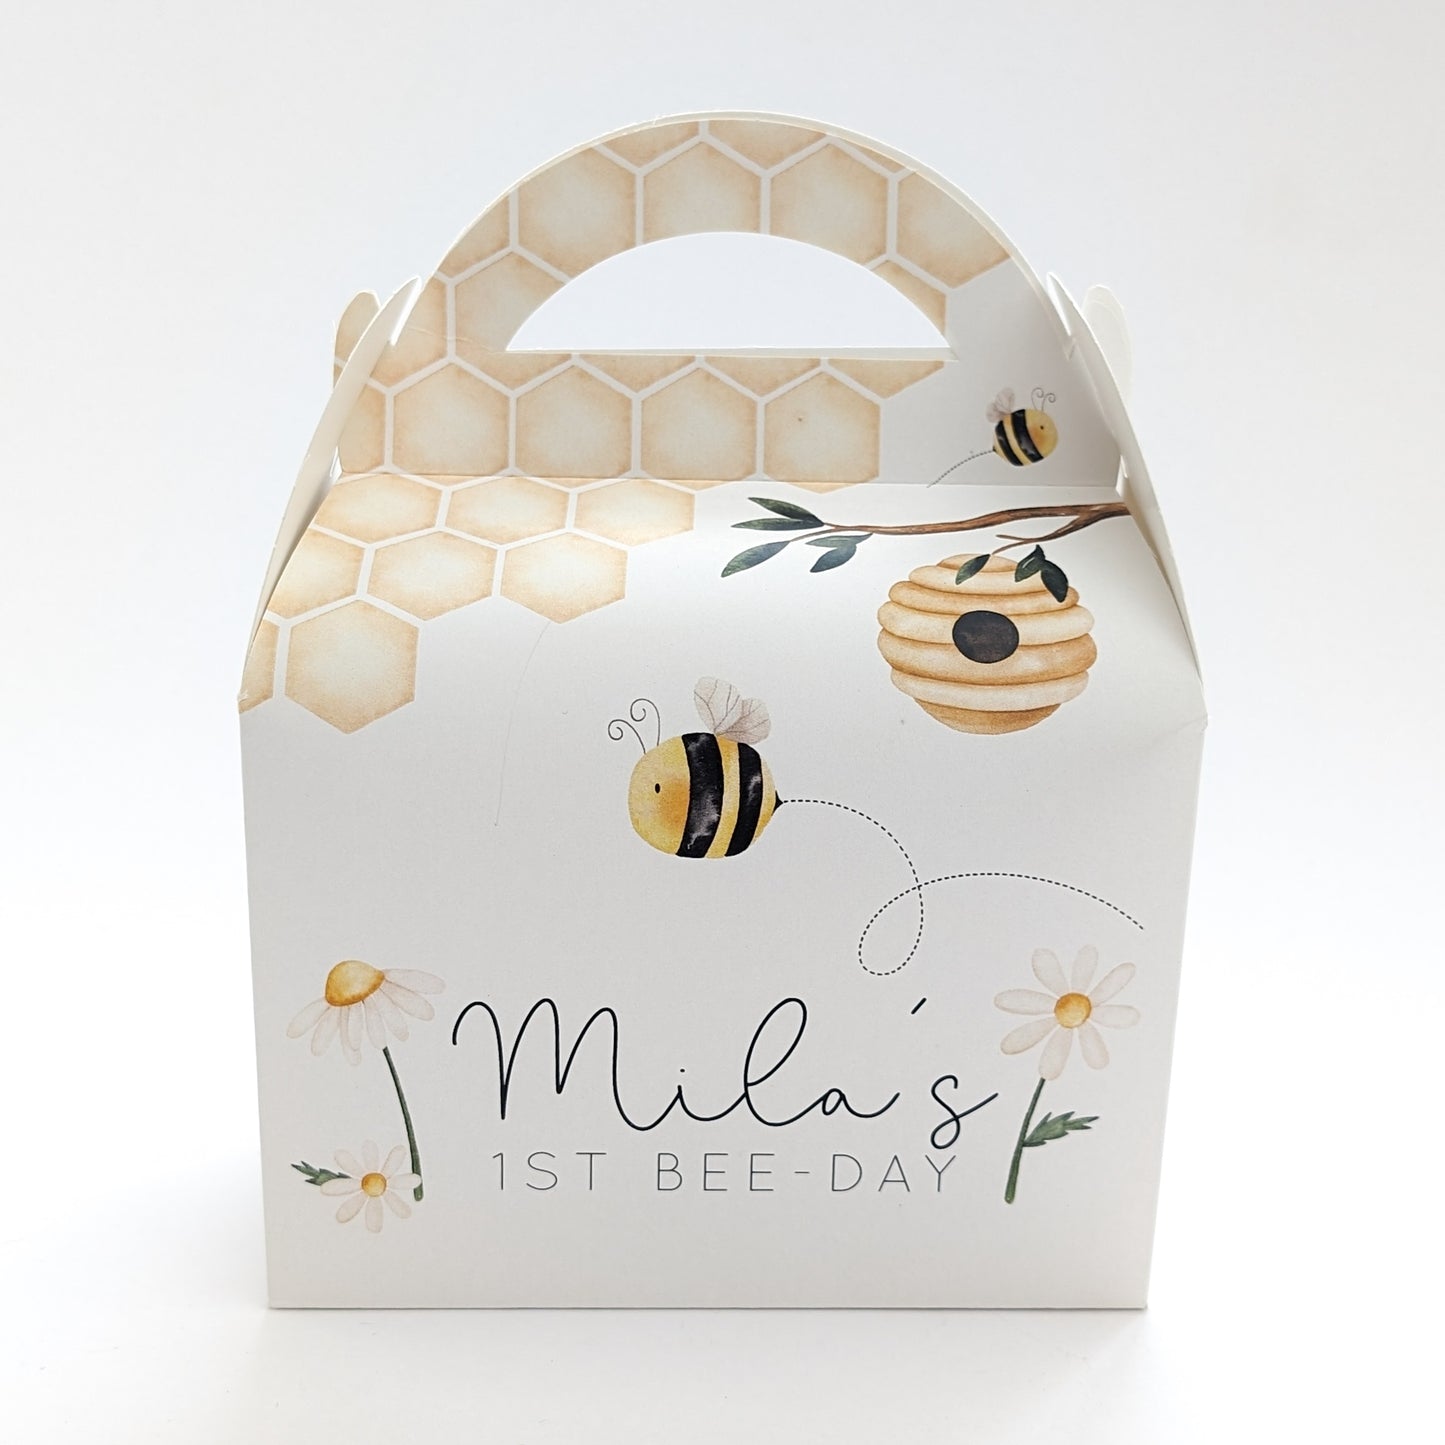 LITTLE HONEYBEE Bee Honey Personalised Children’s Party Box Gift Bag Favour